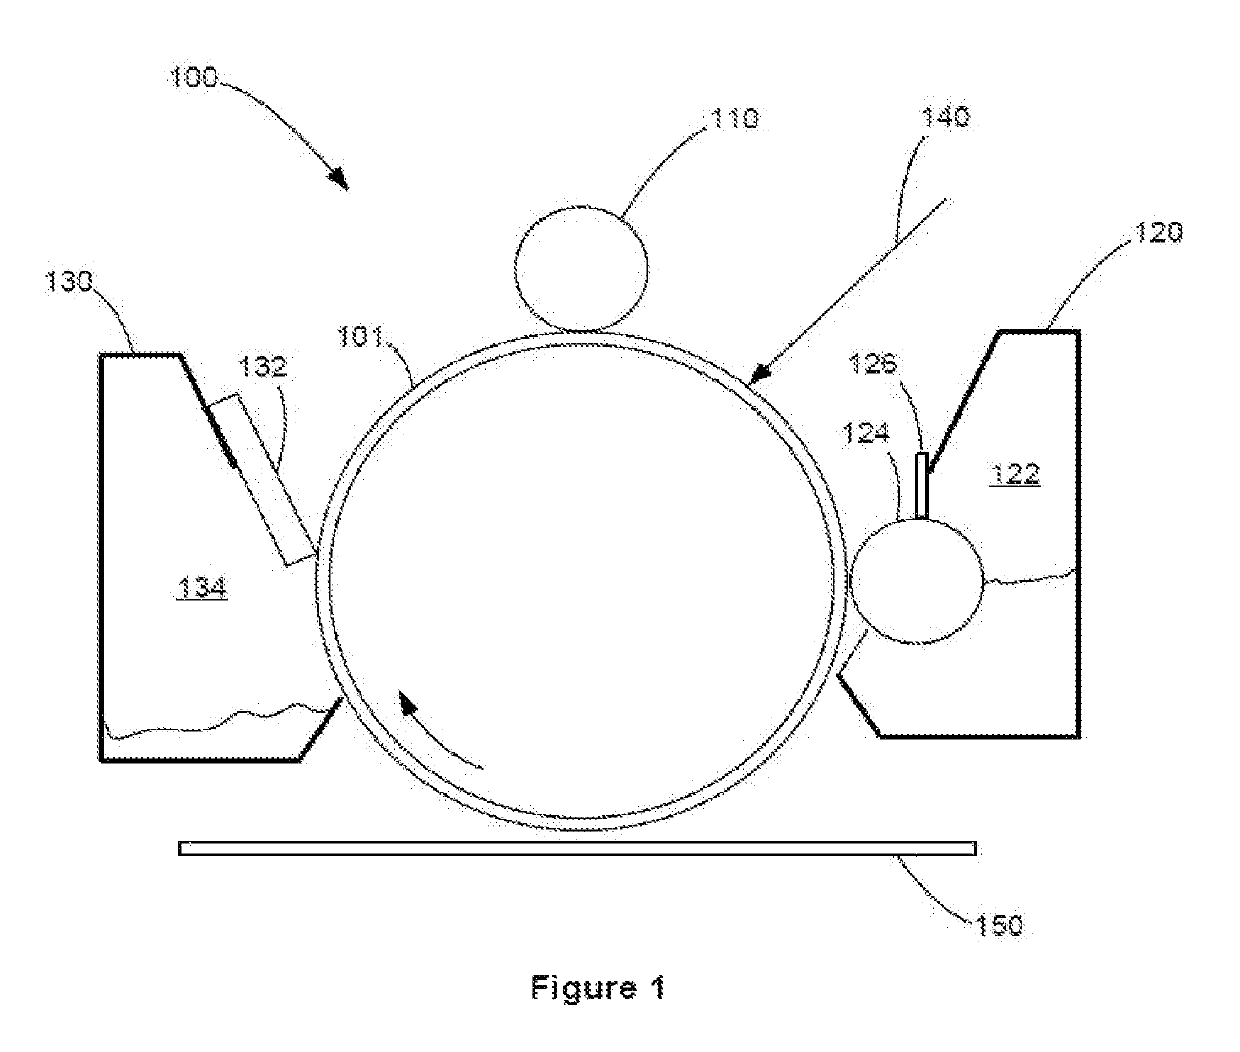 Method to make a photoconductor drum having an overcoat using a dual curing process